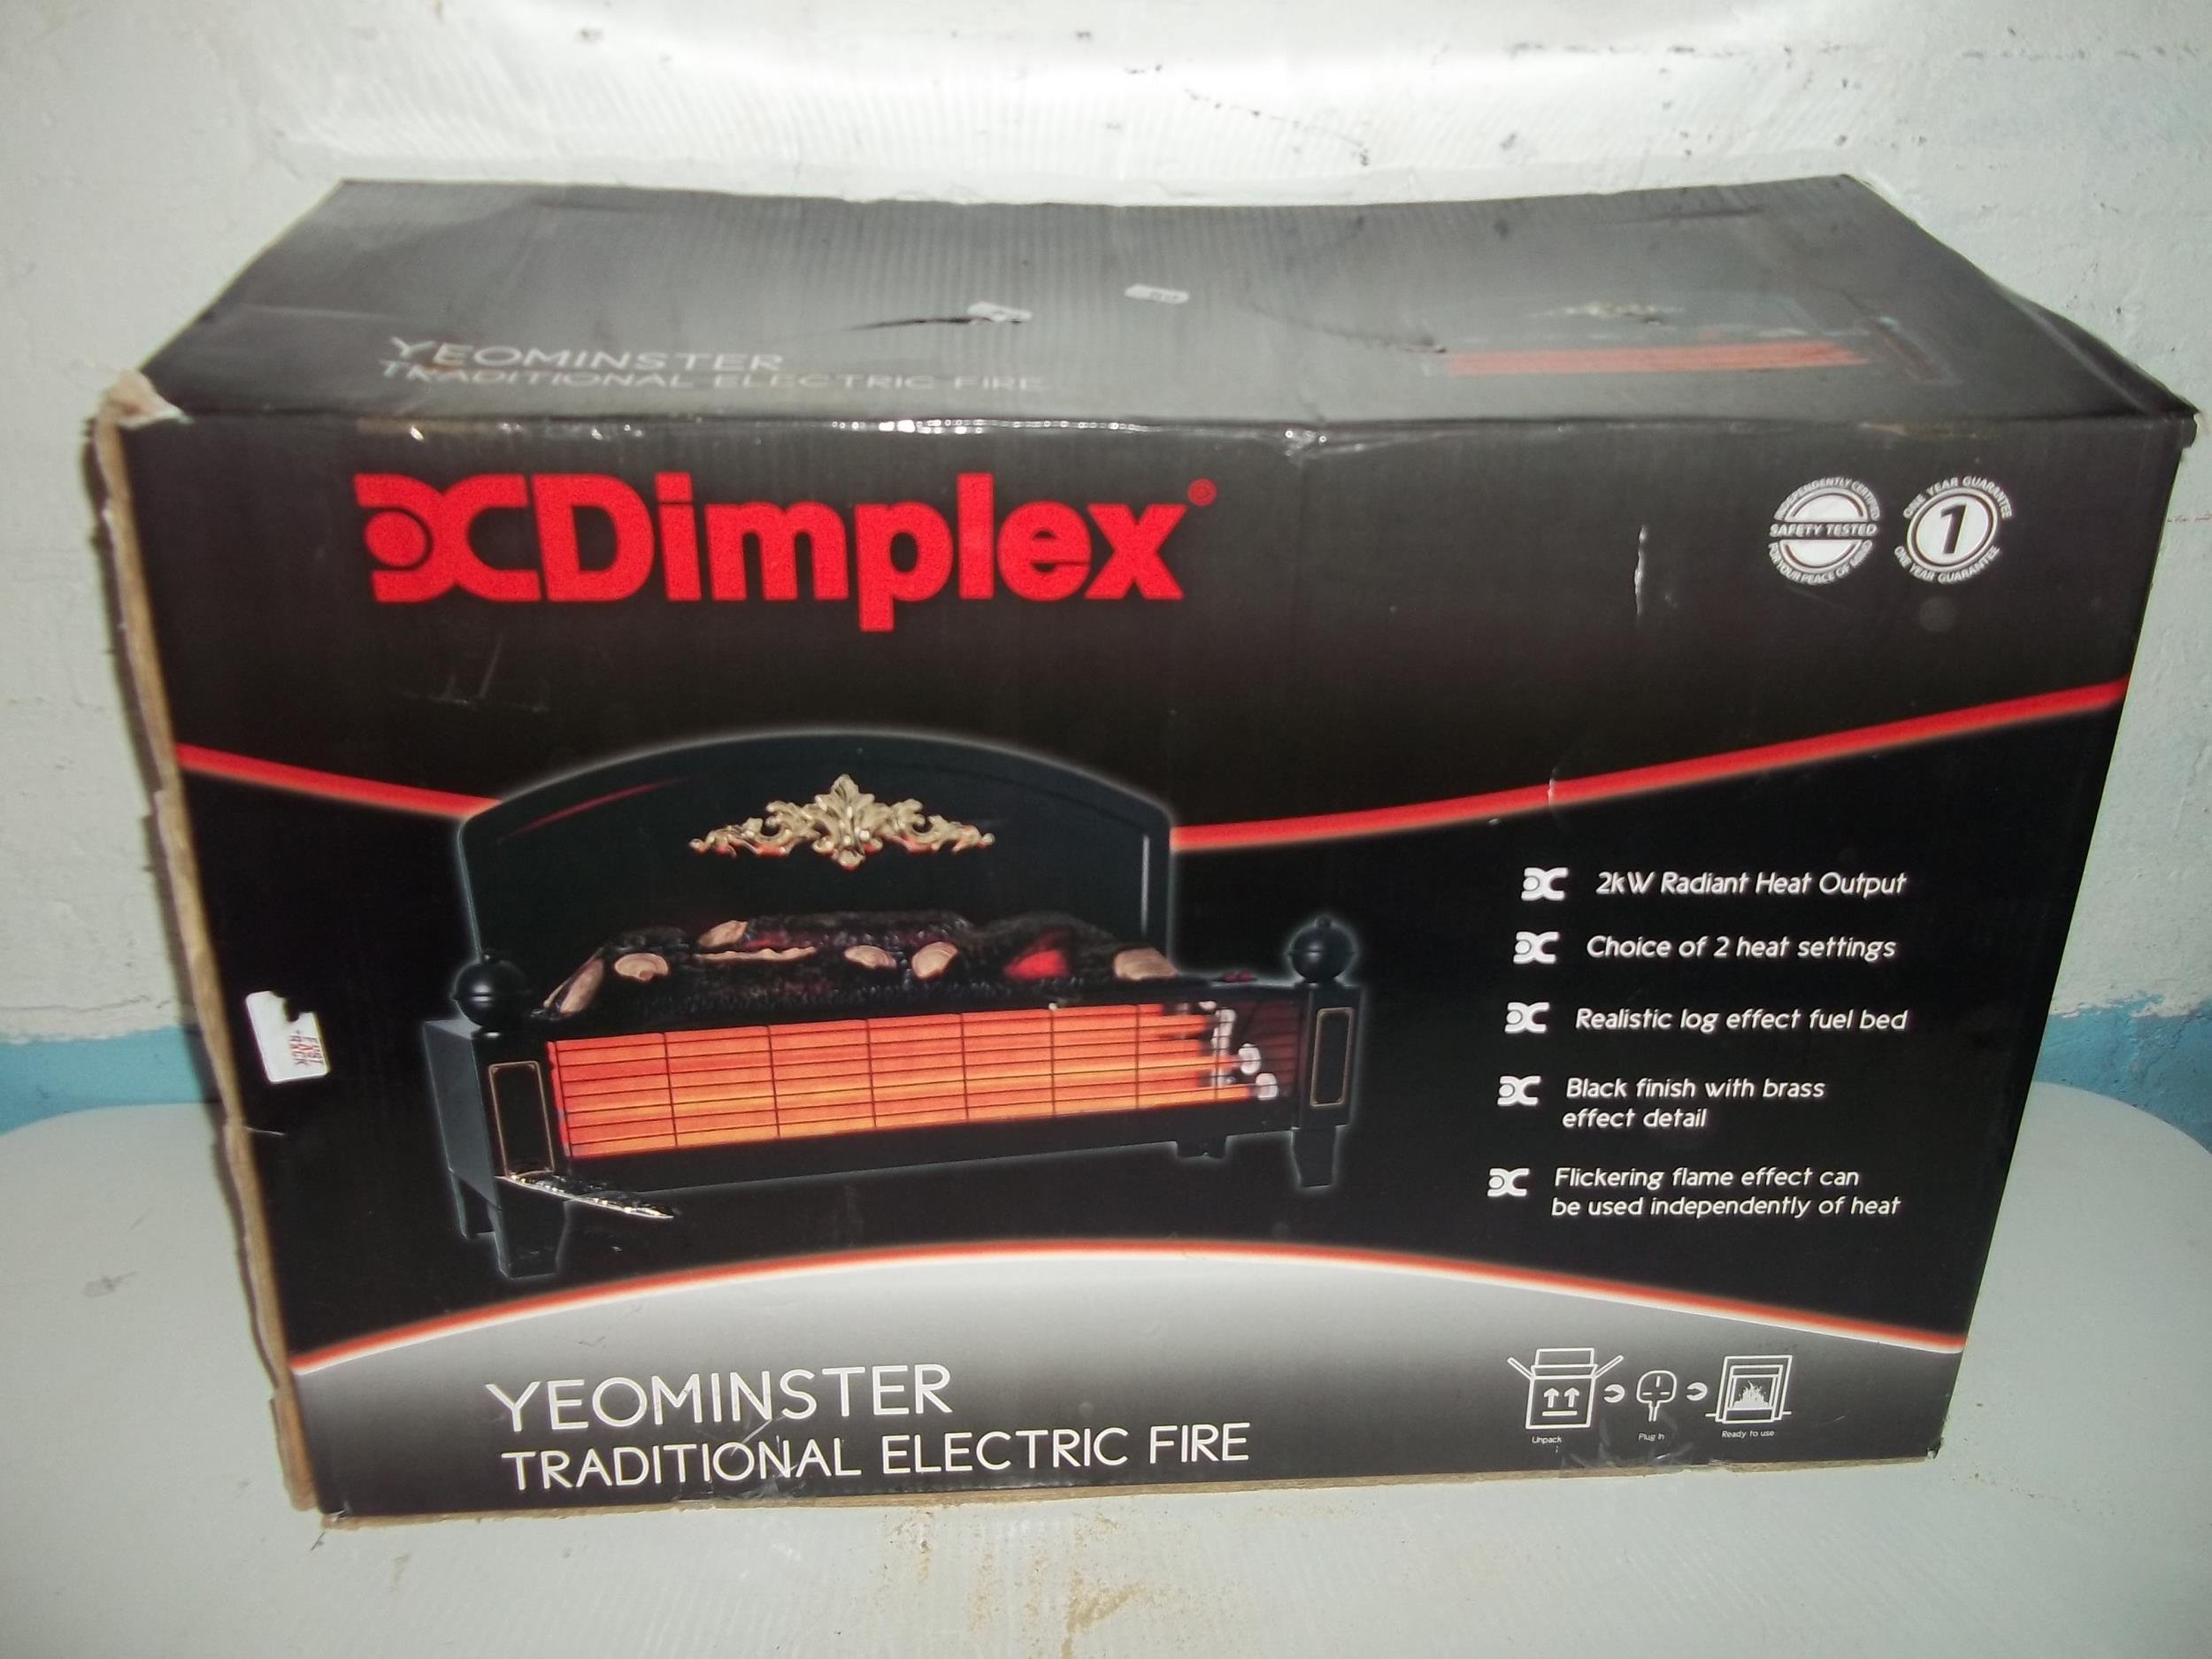 A BOXED DIMPLEX ELECTRIC HEATER/FIRE - Image 2 of 3